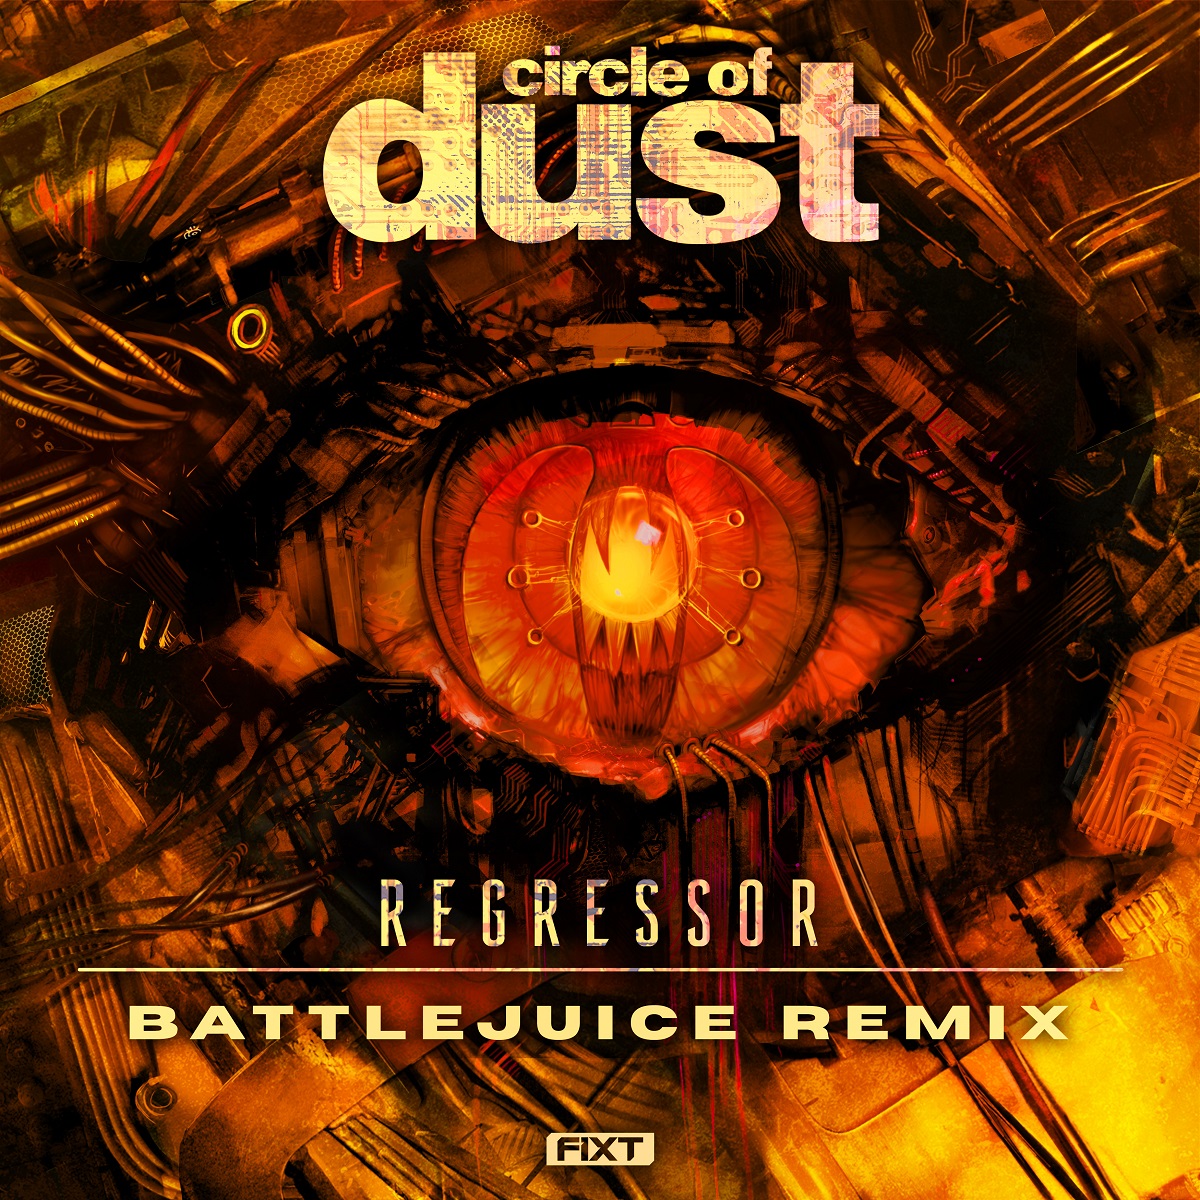 #Battlejuice takes on @_circleofdust's 'Regressor', and add a #synthwave flavour to the original Heavy #industrial track; Out now on @fixtmusic.

News Link
facebook.com/permalink.php?…

@judith_fisher #regressor #newremix #metal #electronicrock #metalwave #alternative #gothrock